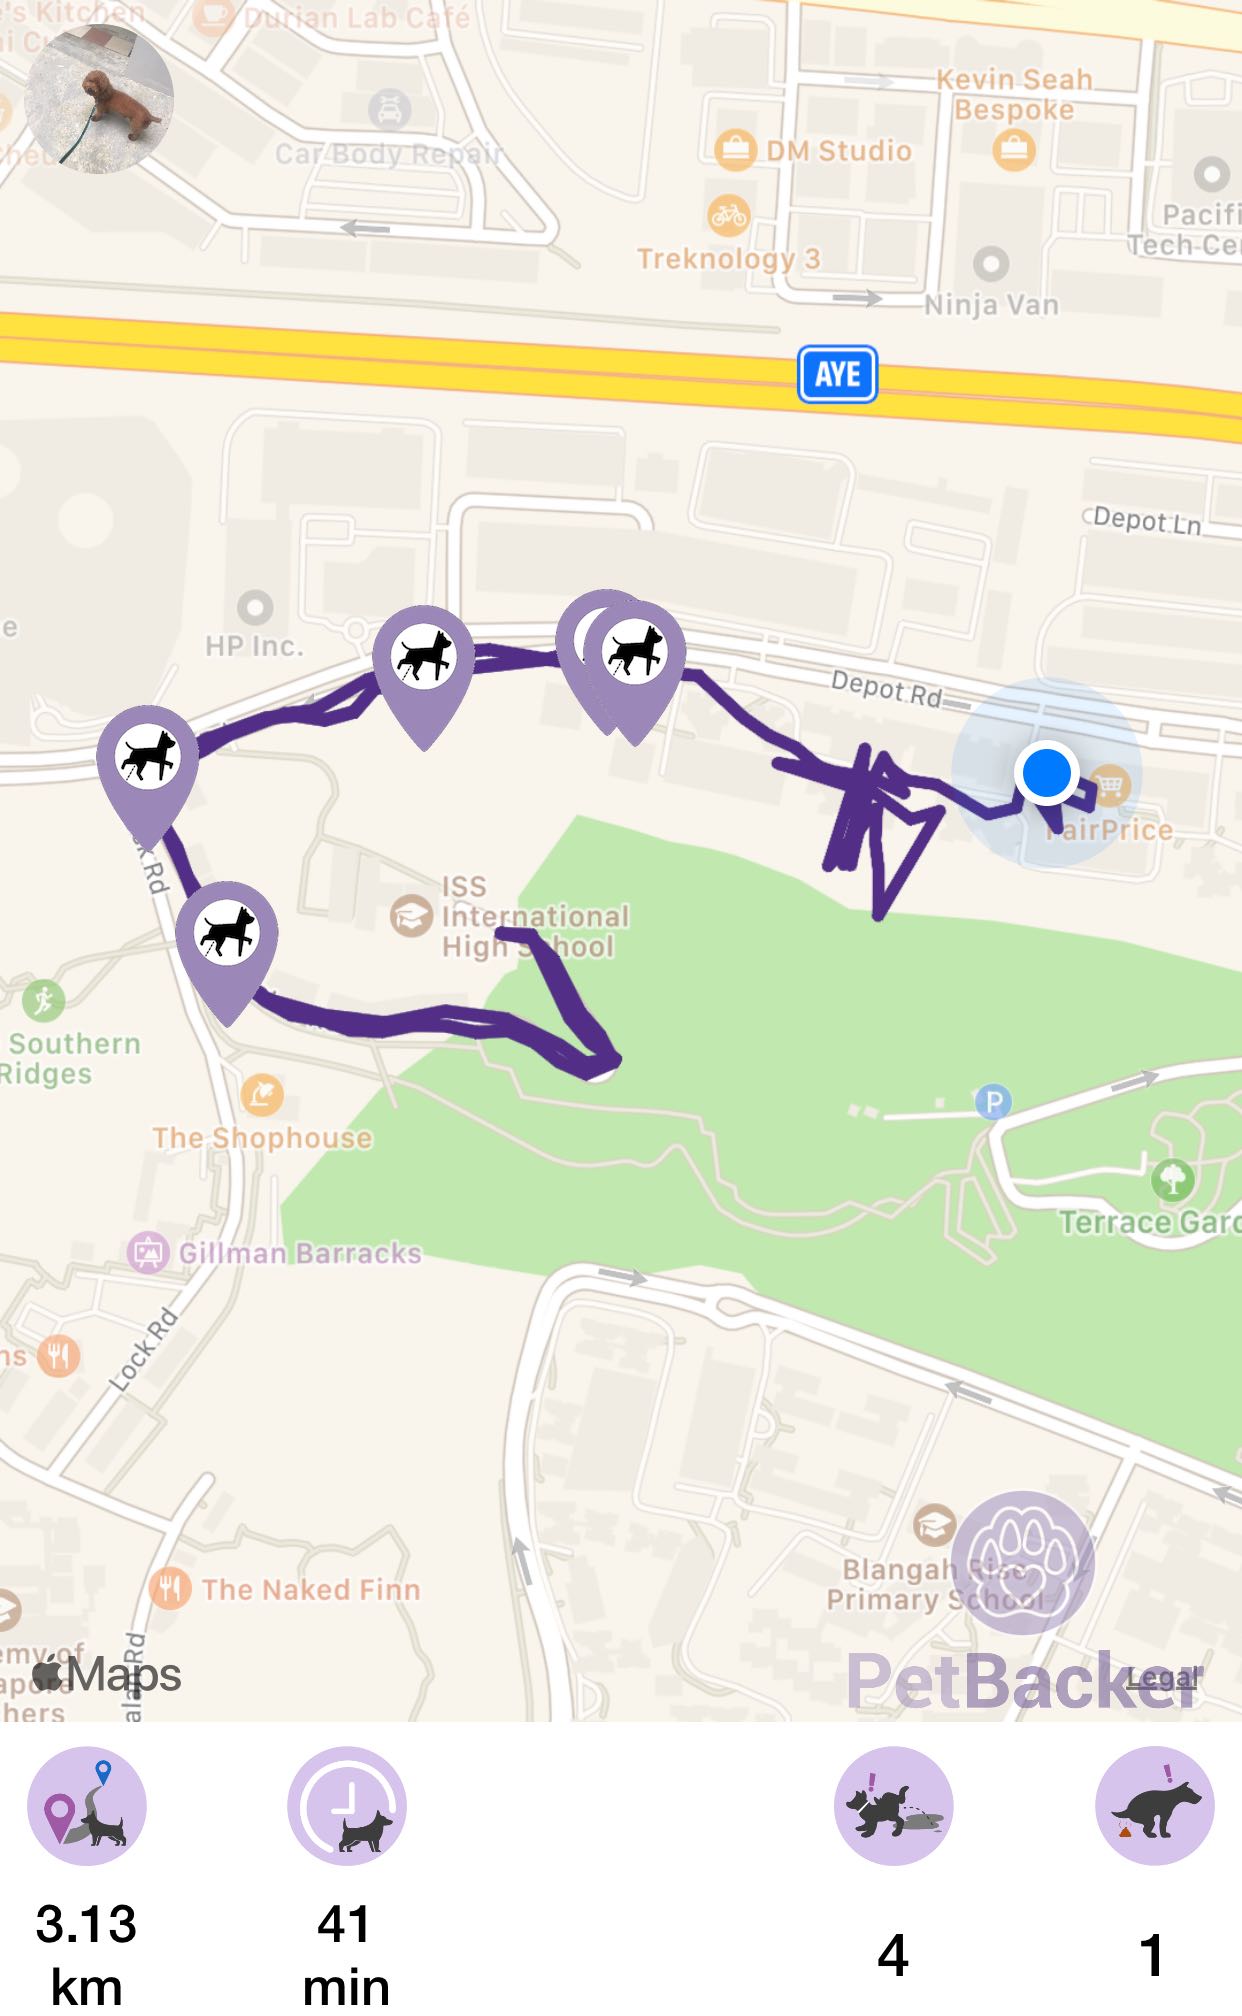 Just completed pet walking of 3.13 km